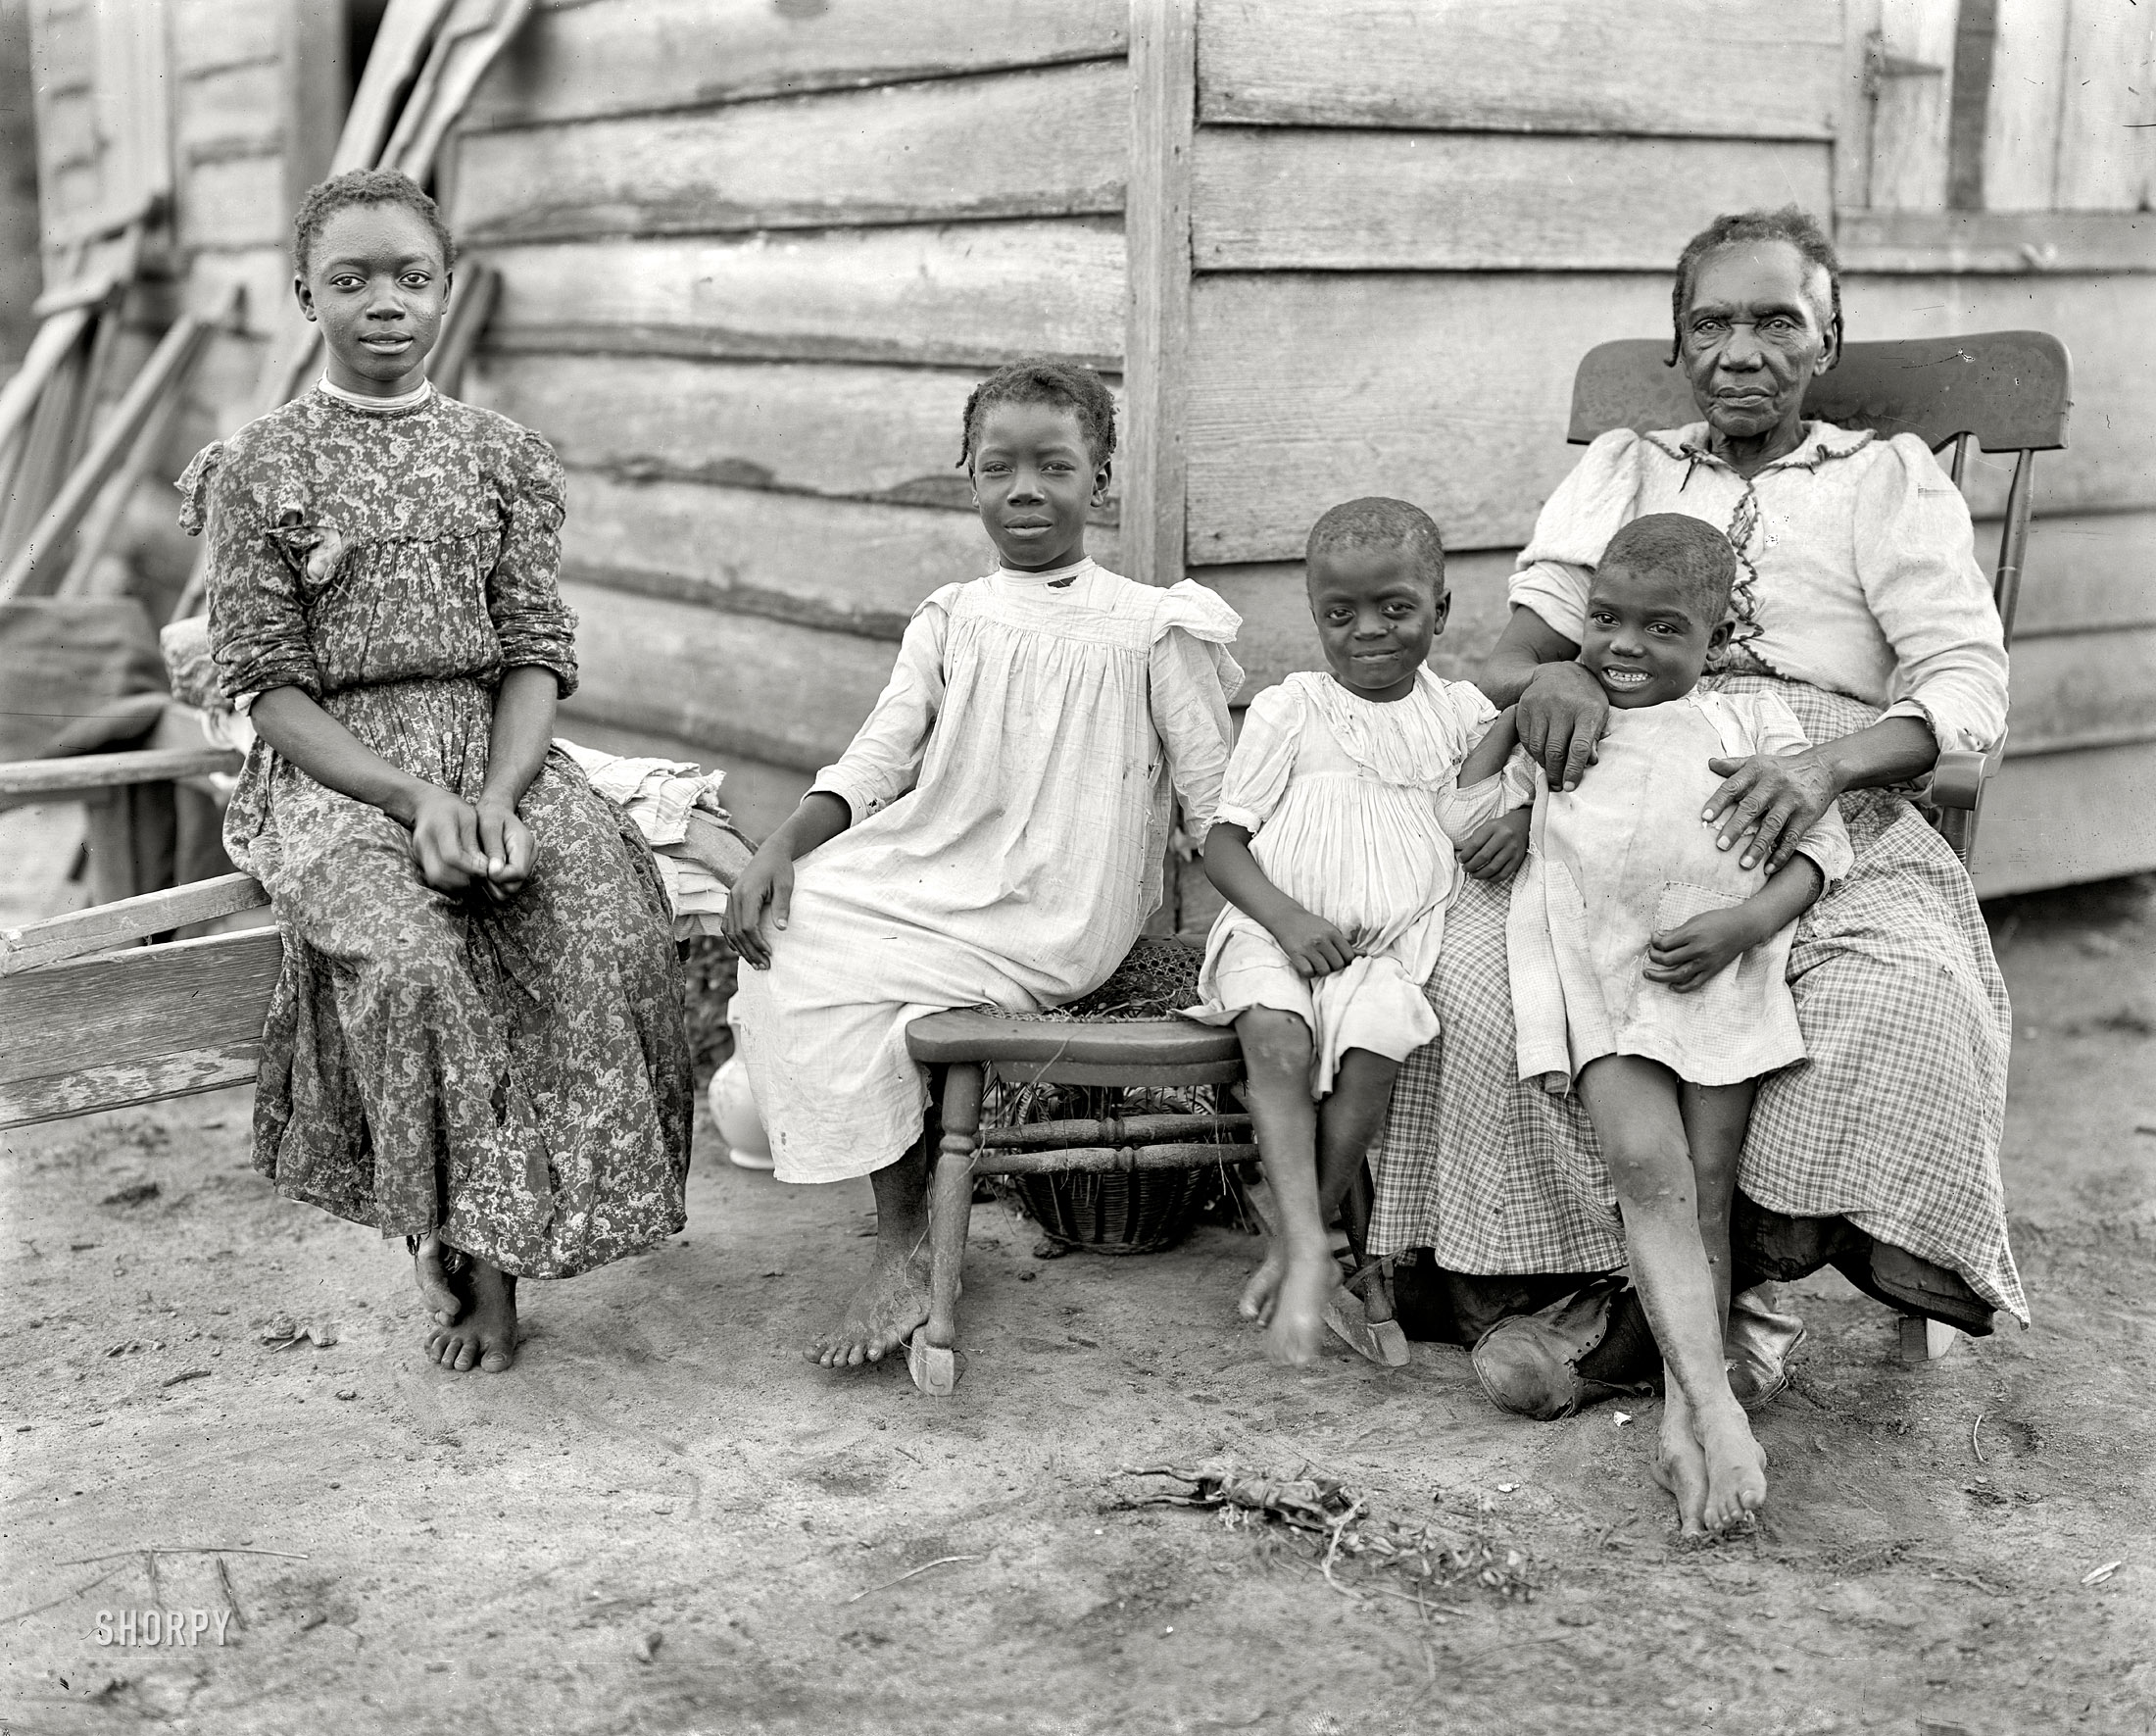 Circa 1902, location not specified. "A happy family." 8x10 inch dry plate glass negative, Detroit Publishing Company. View full size.